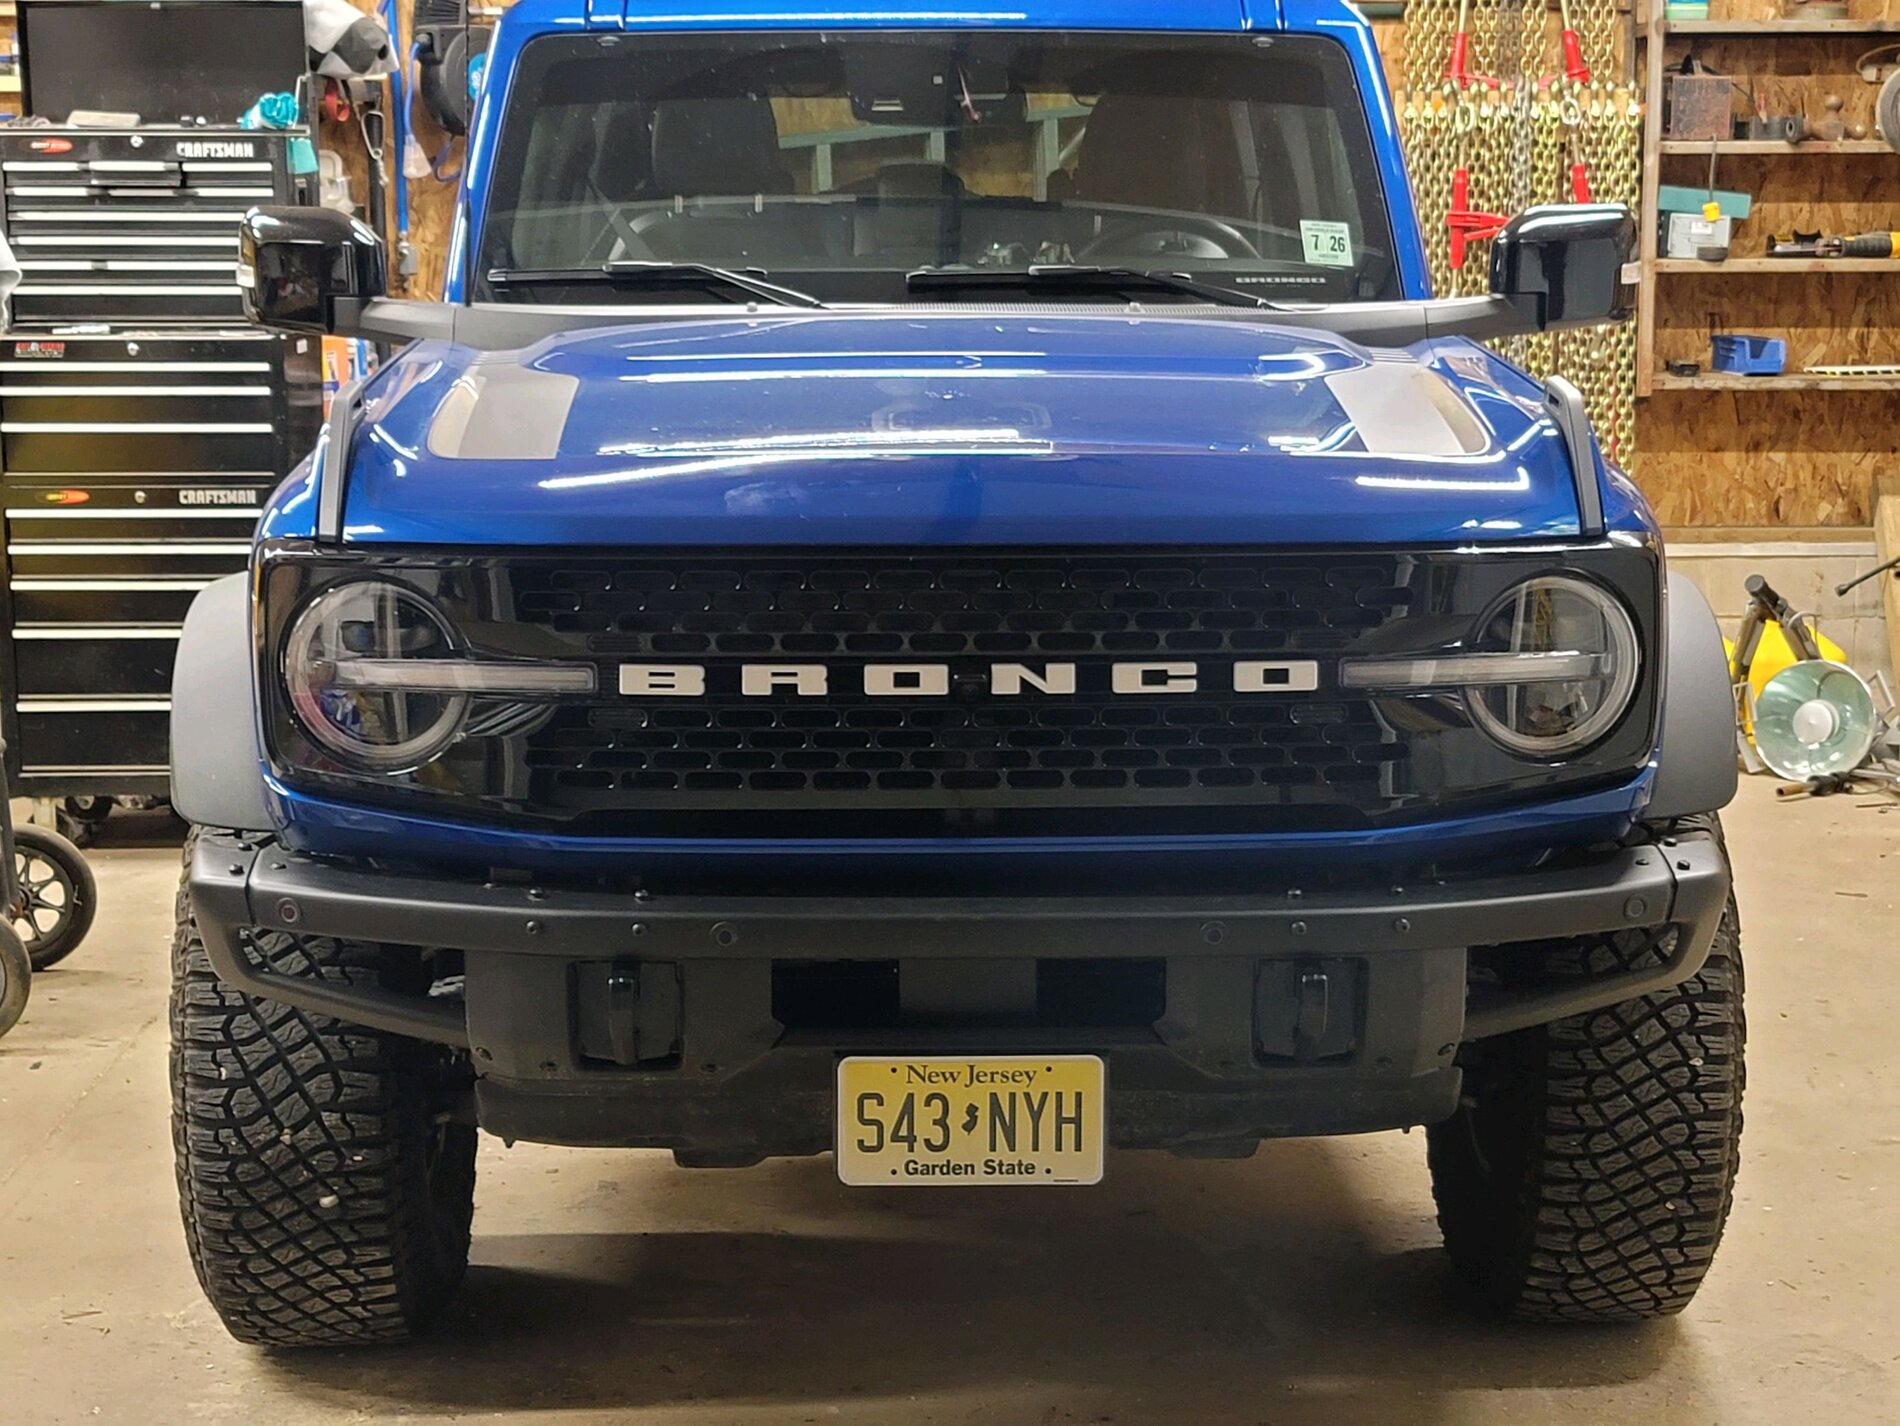 Ford Bronco PRICE DROP - Finally a Front License Plate bracket solution - order yours today IMG_1492